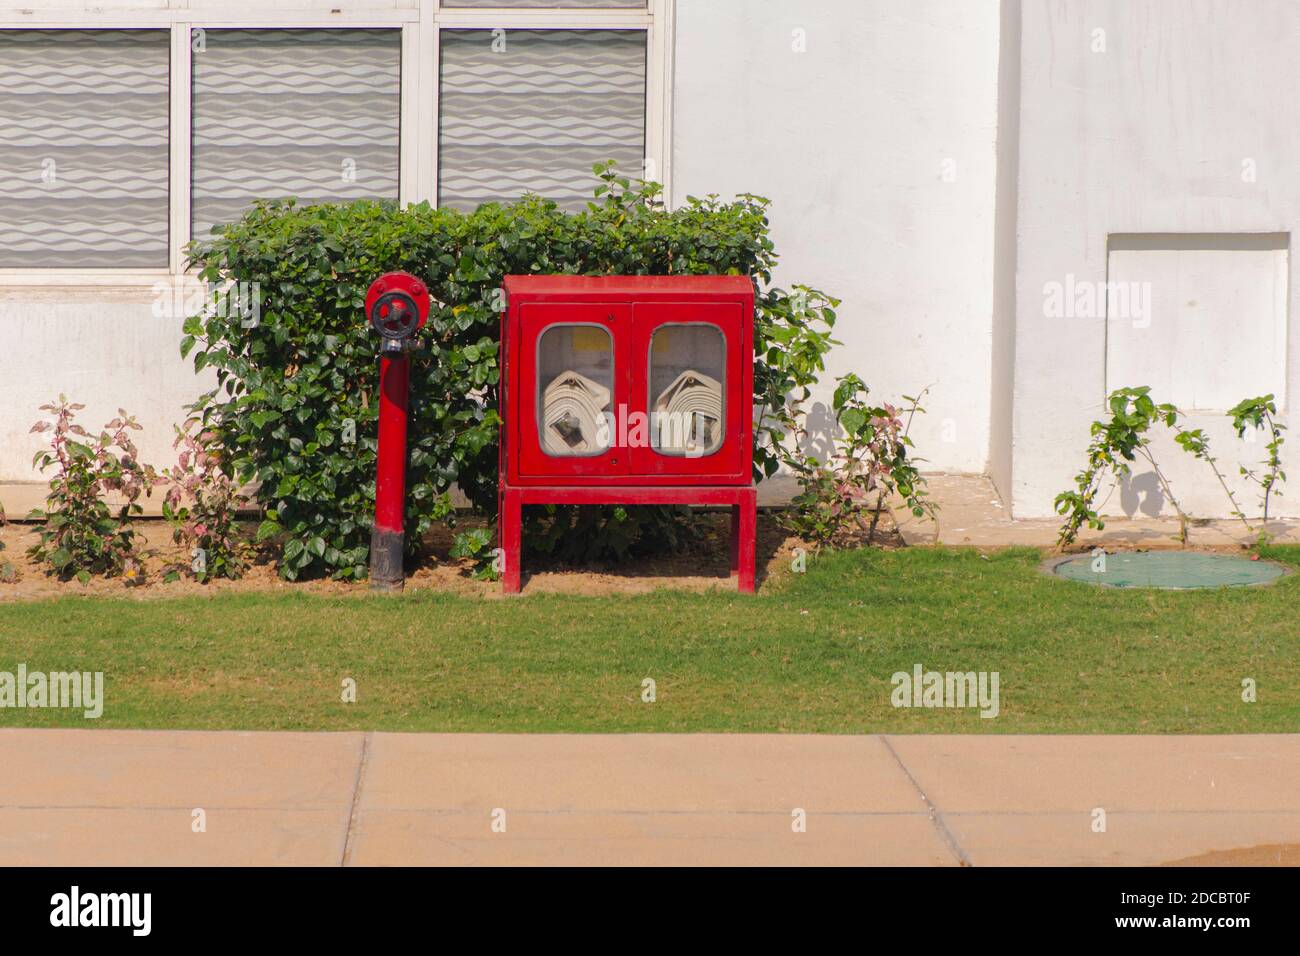 A double fire hose cabinet or box standing on ground Stock Photo